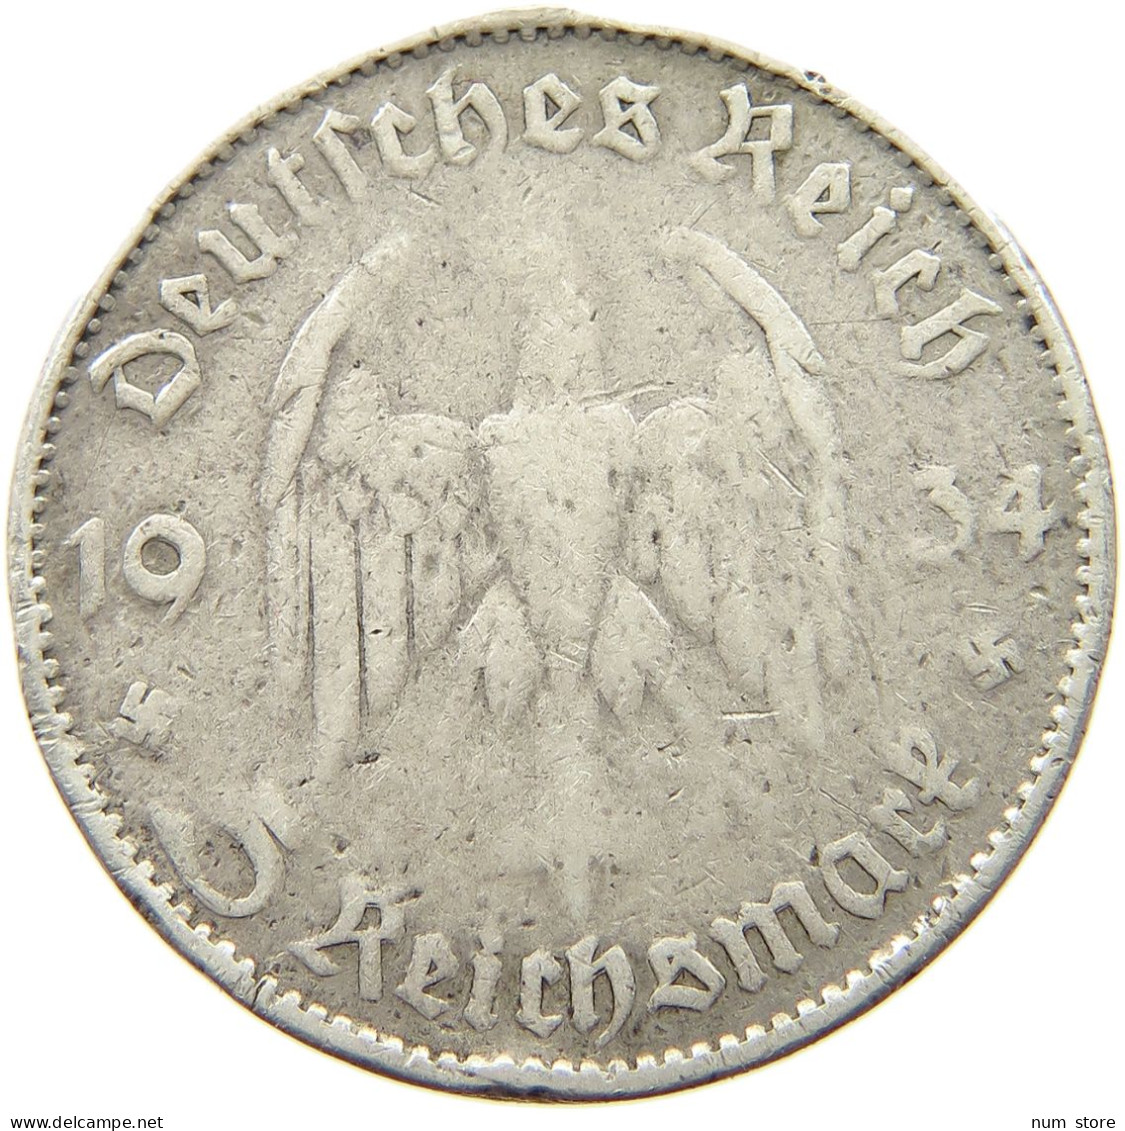 DRITTES REICH 5 MARK 1934 G ENGRAVED CACKIE JIMMIE #t125 0509 - 5 Reichsmark